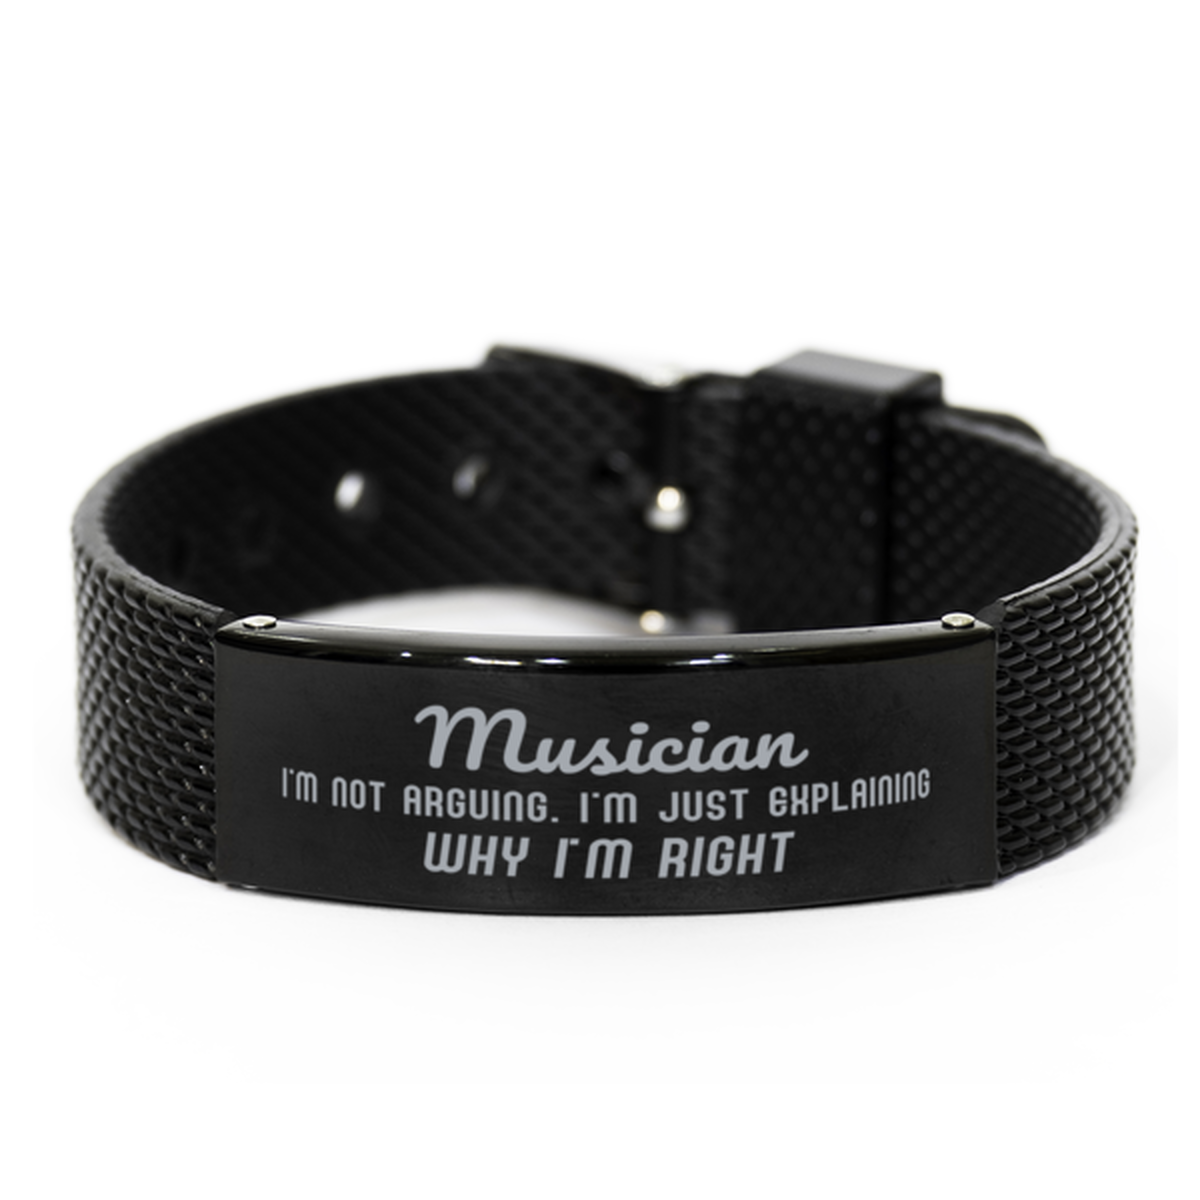 Musician I'm not Arguing. I'm Just Explaining Why I'm RIGHT Black Shark Mesh Bracelet, Funny Saying Quote Musician Gifts For Musician Graduation Birthday Christmas Gifts for Men Women Coworker